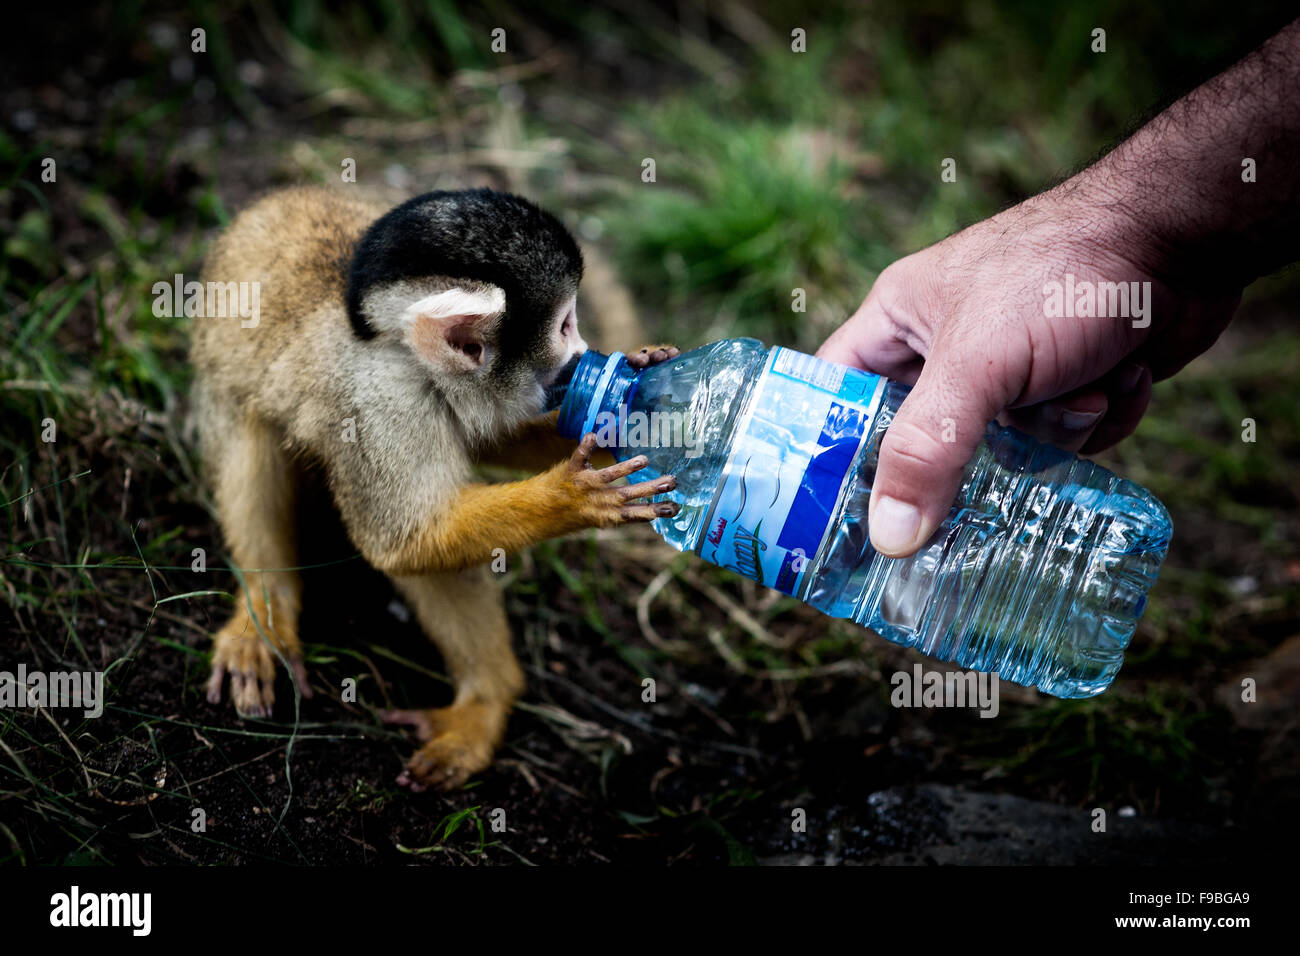 A baby monkey drinking water of a bottle. Stock Photo